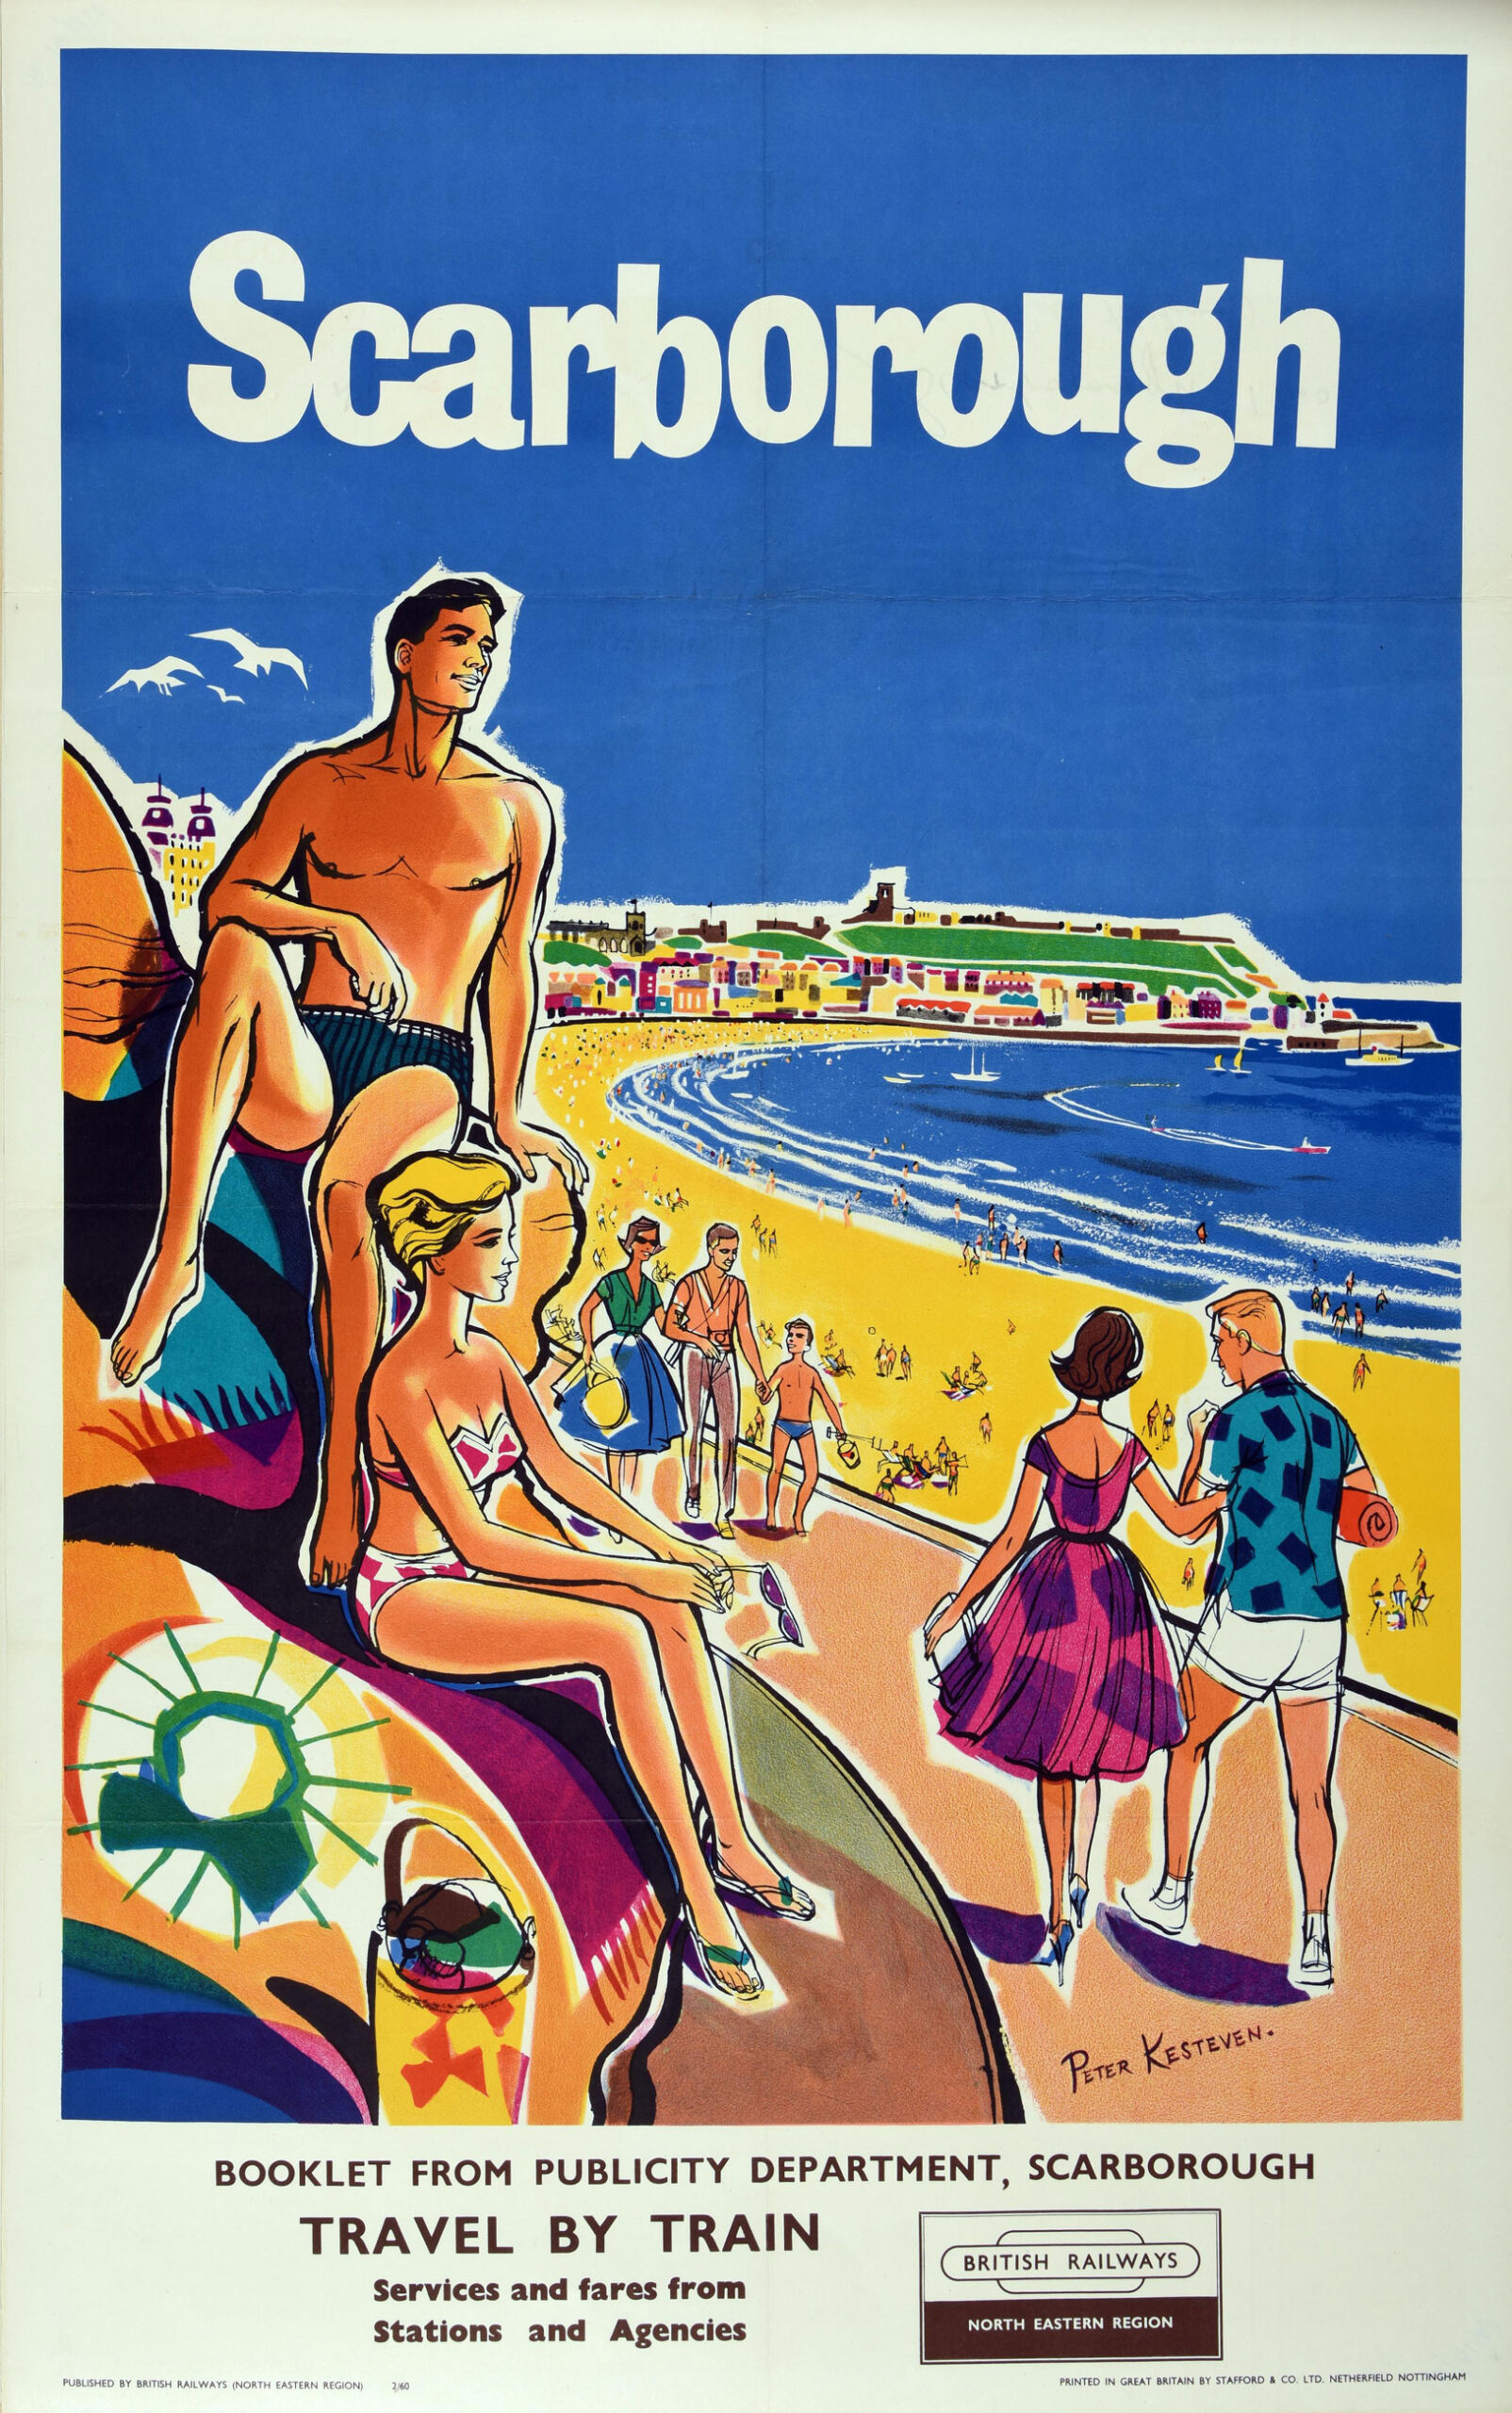 Illustration of sunbathers at Scarborough beach the the bay in the background